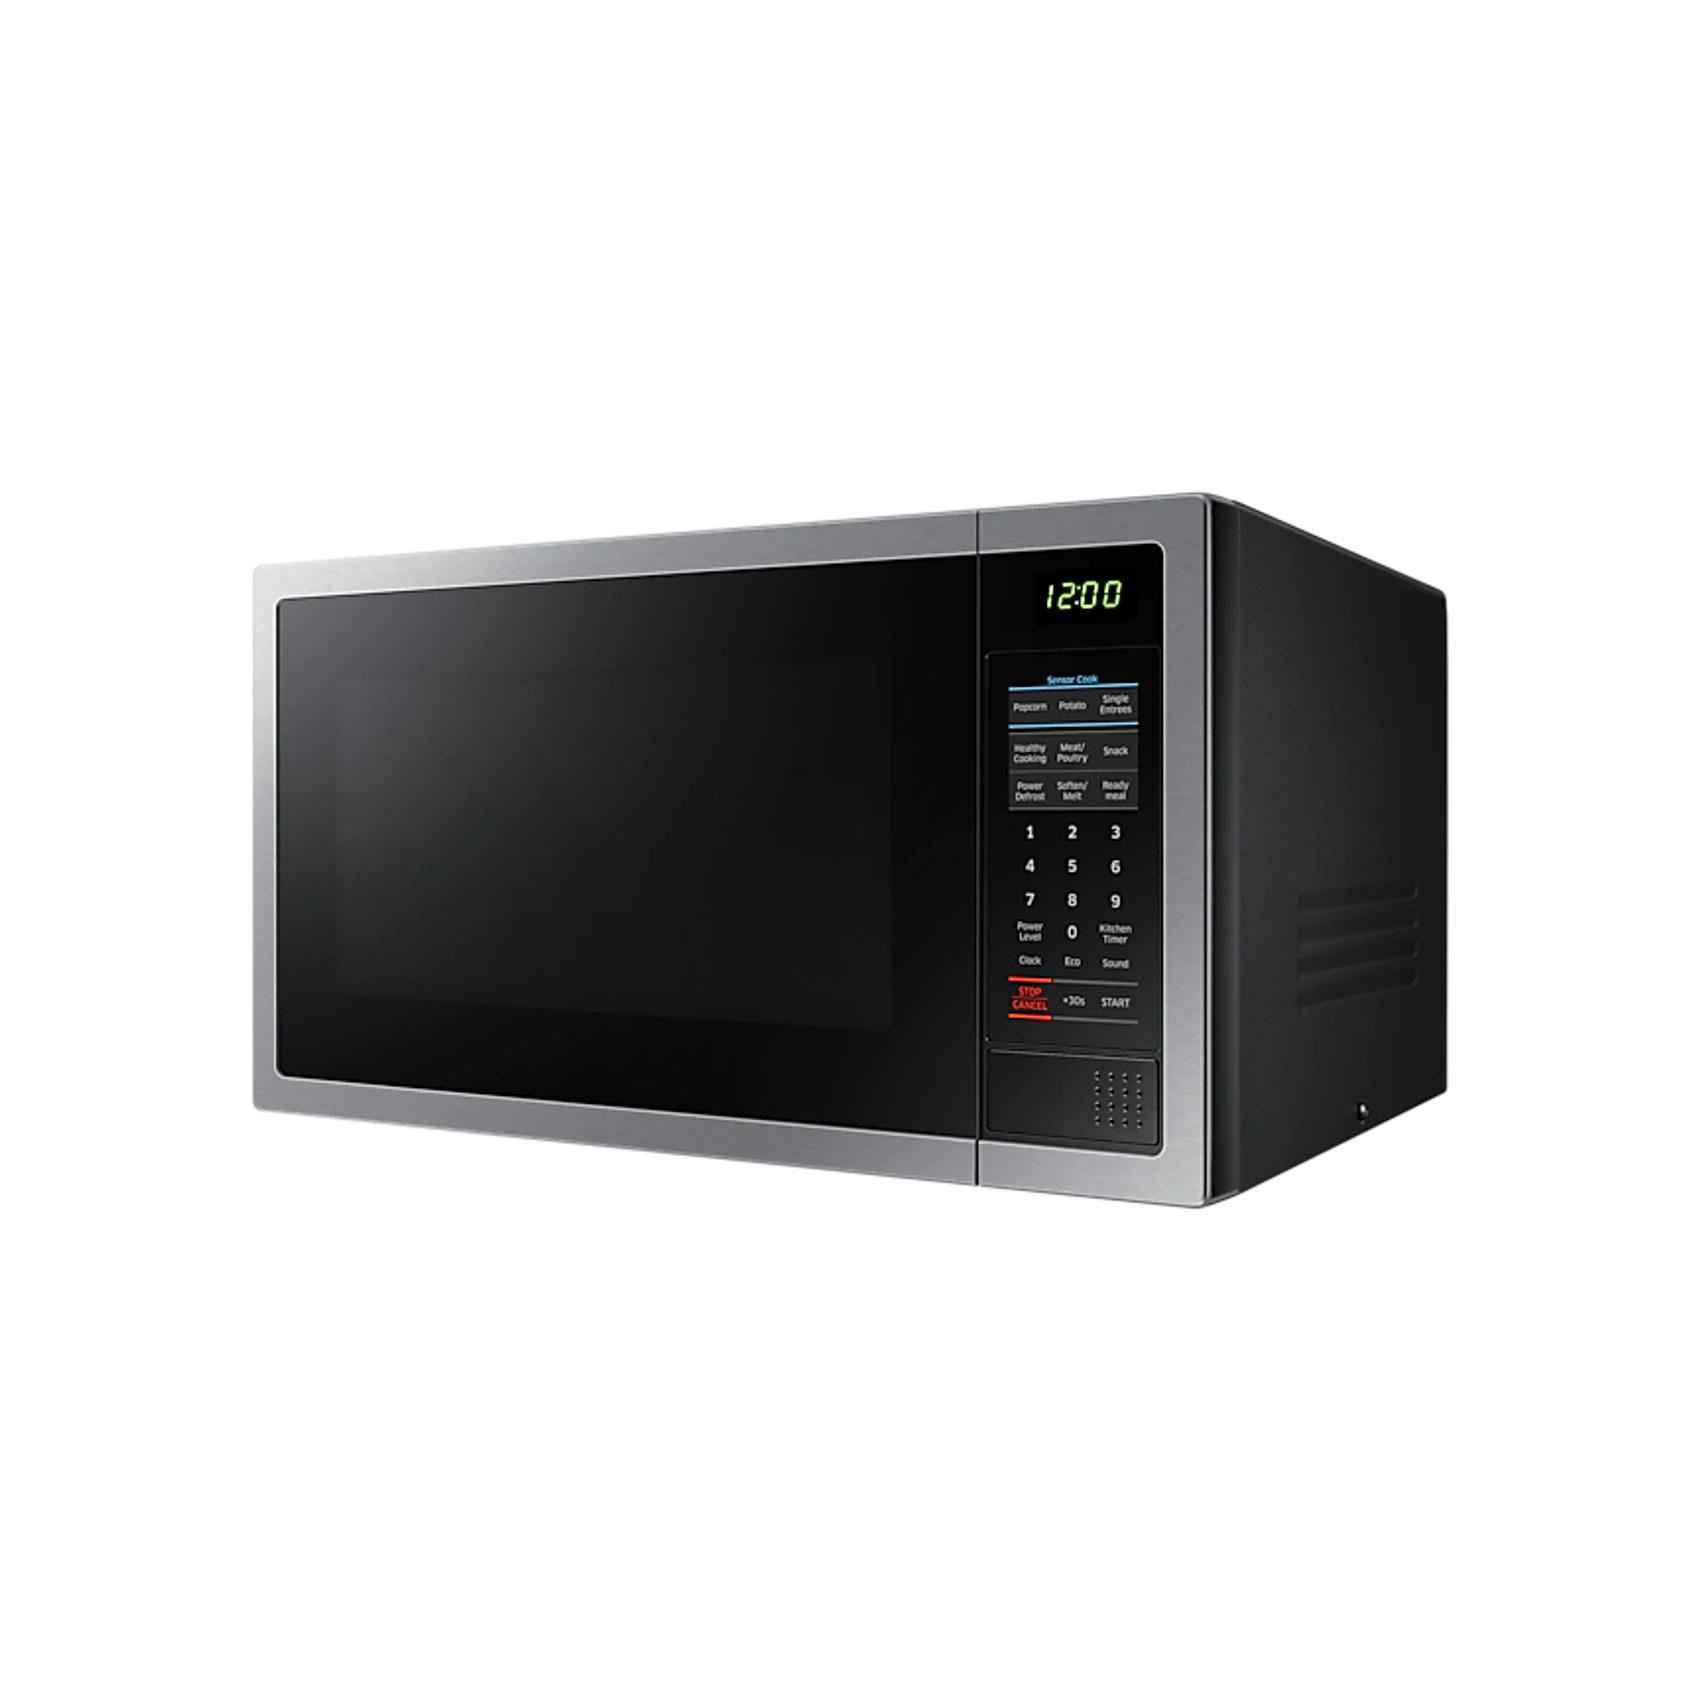 Samsung 28L 1000W Solo Microwave - Stainless Steel With Black Door (Photo: 2)